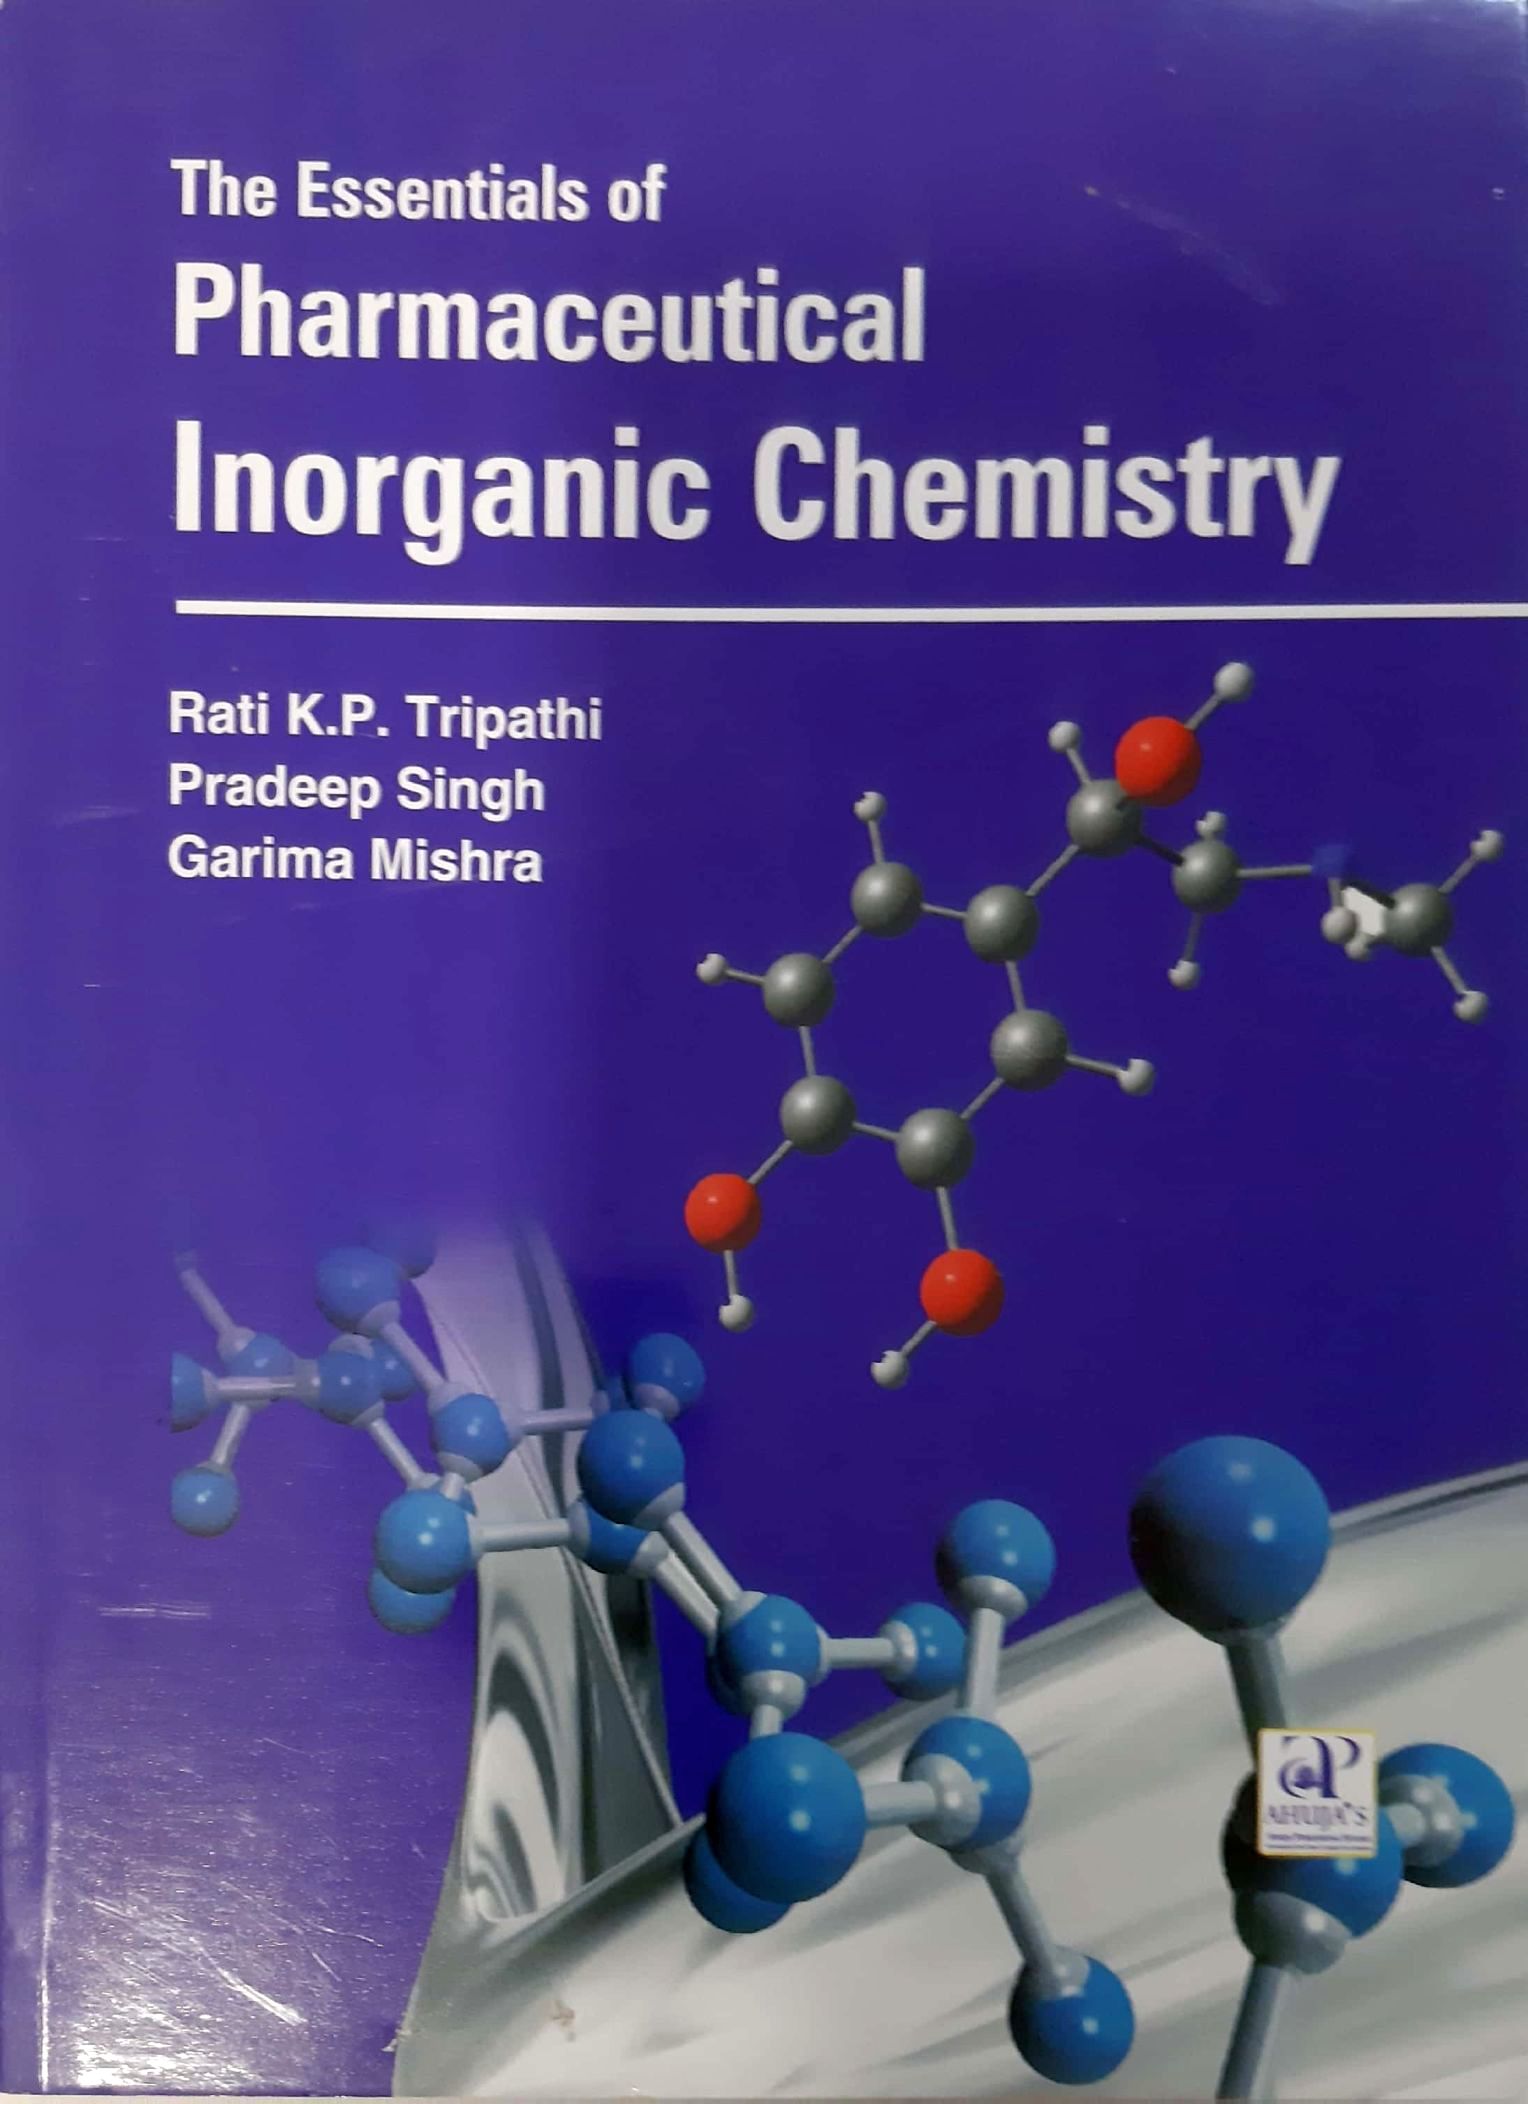 exclusive-publishers/ahuja-publishing-house/the-essentials-of-pharmaceutical-inorganic-chemistry--9789380316741